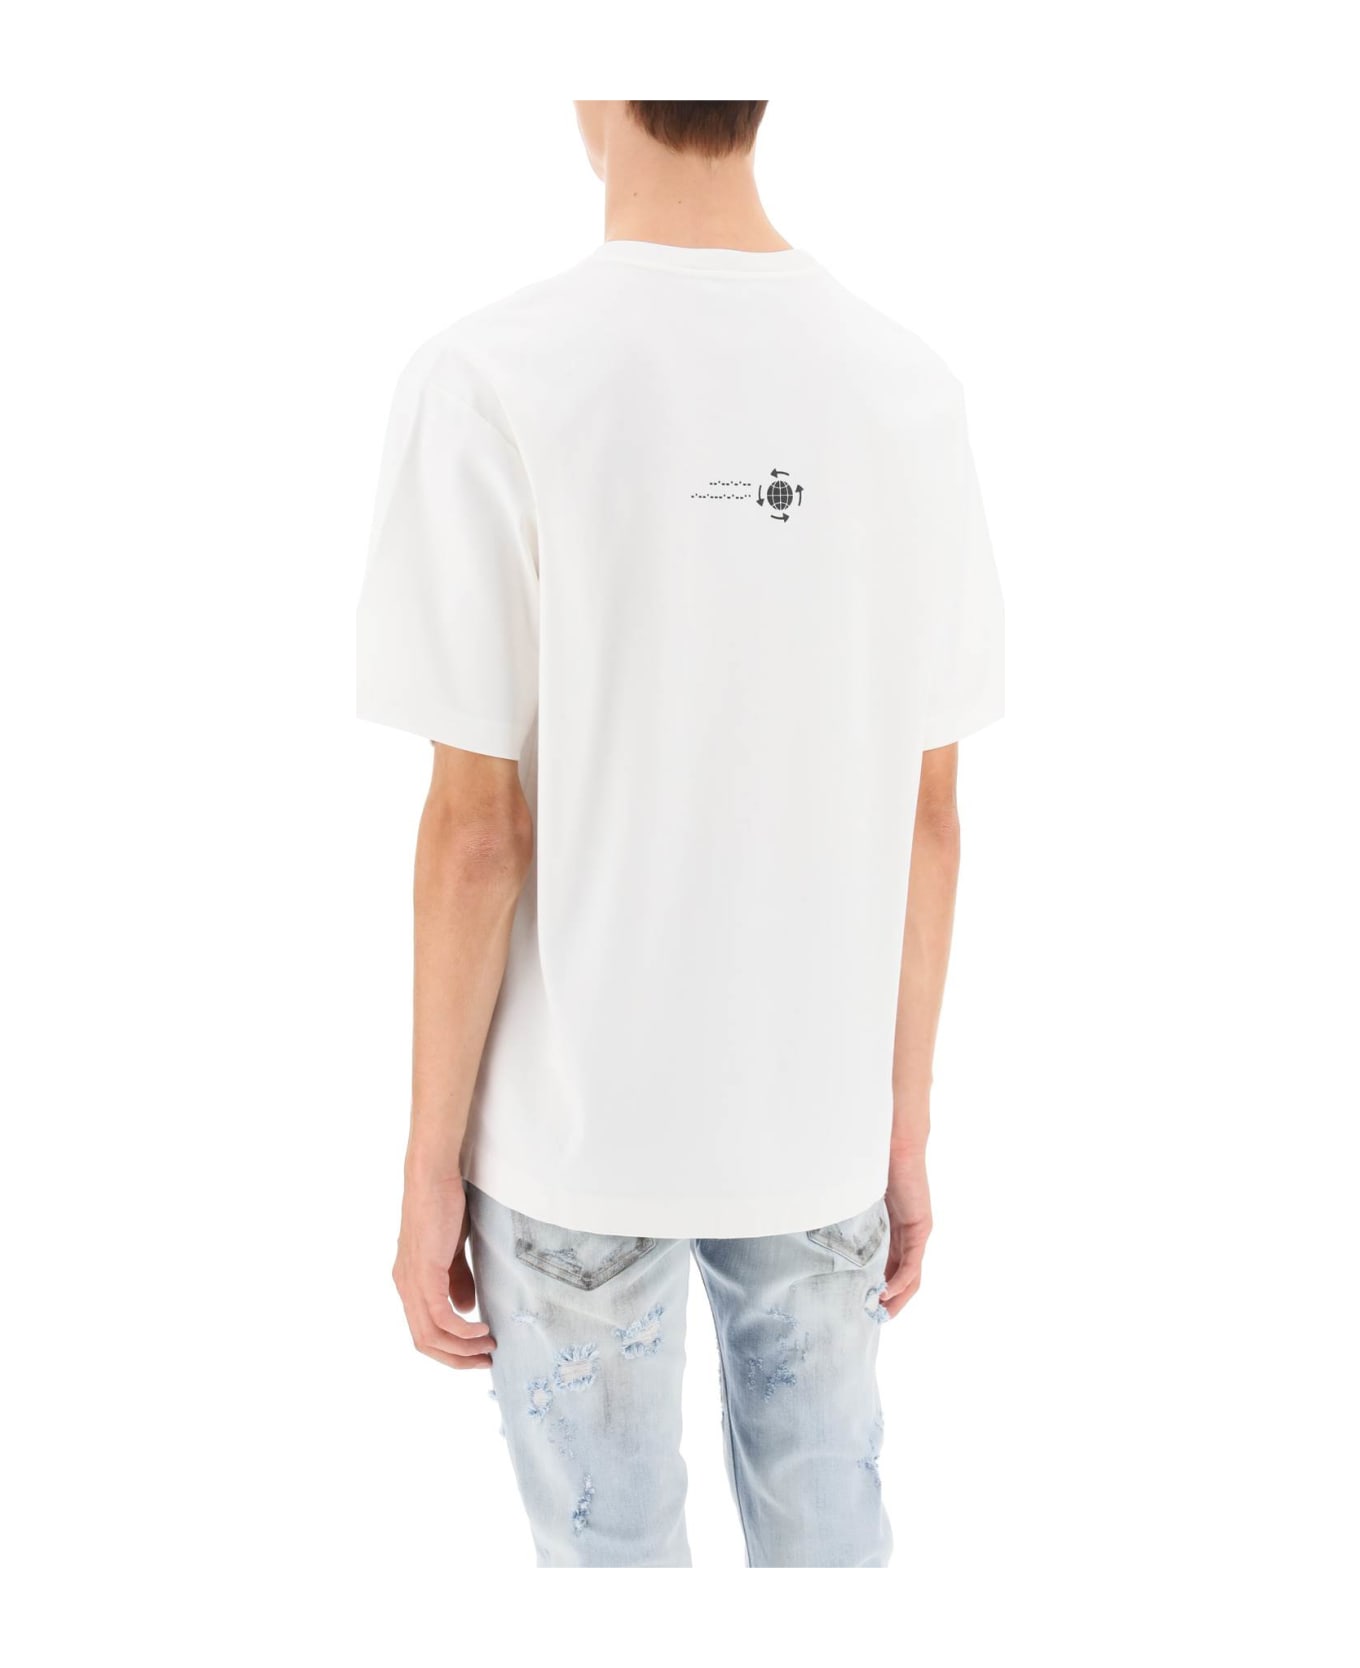 Dolce & Gabbana T-shirt With Embroidery And Prints - Bianco シャツ